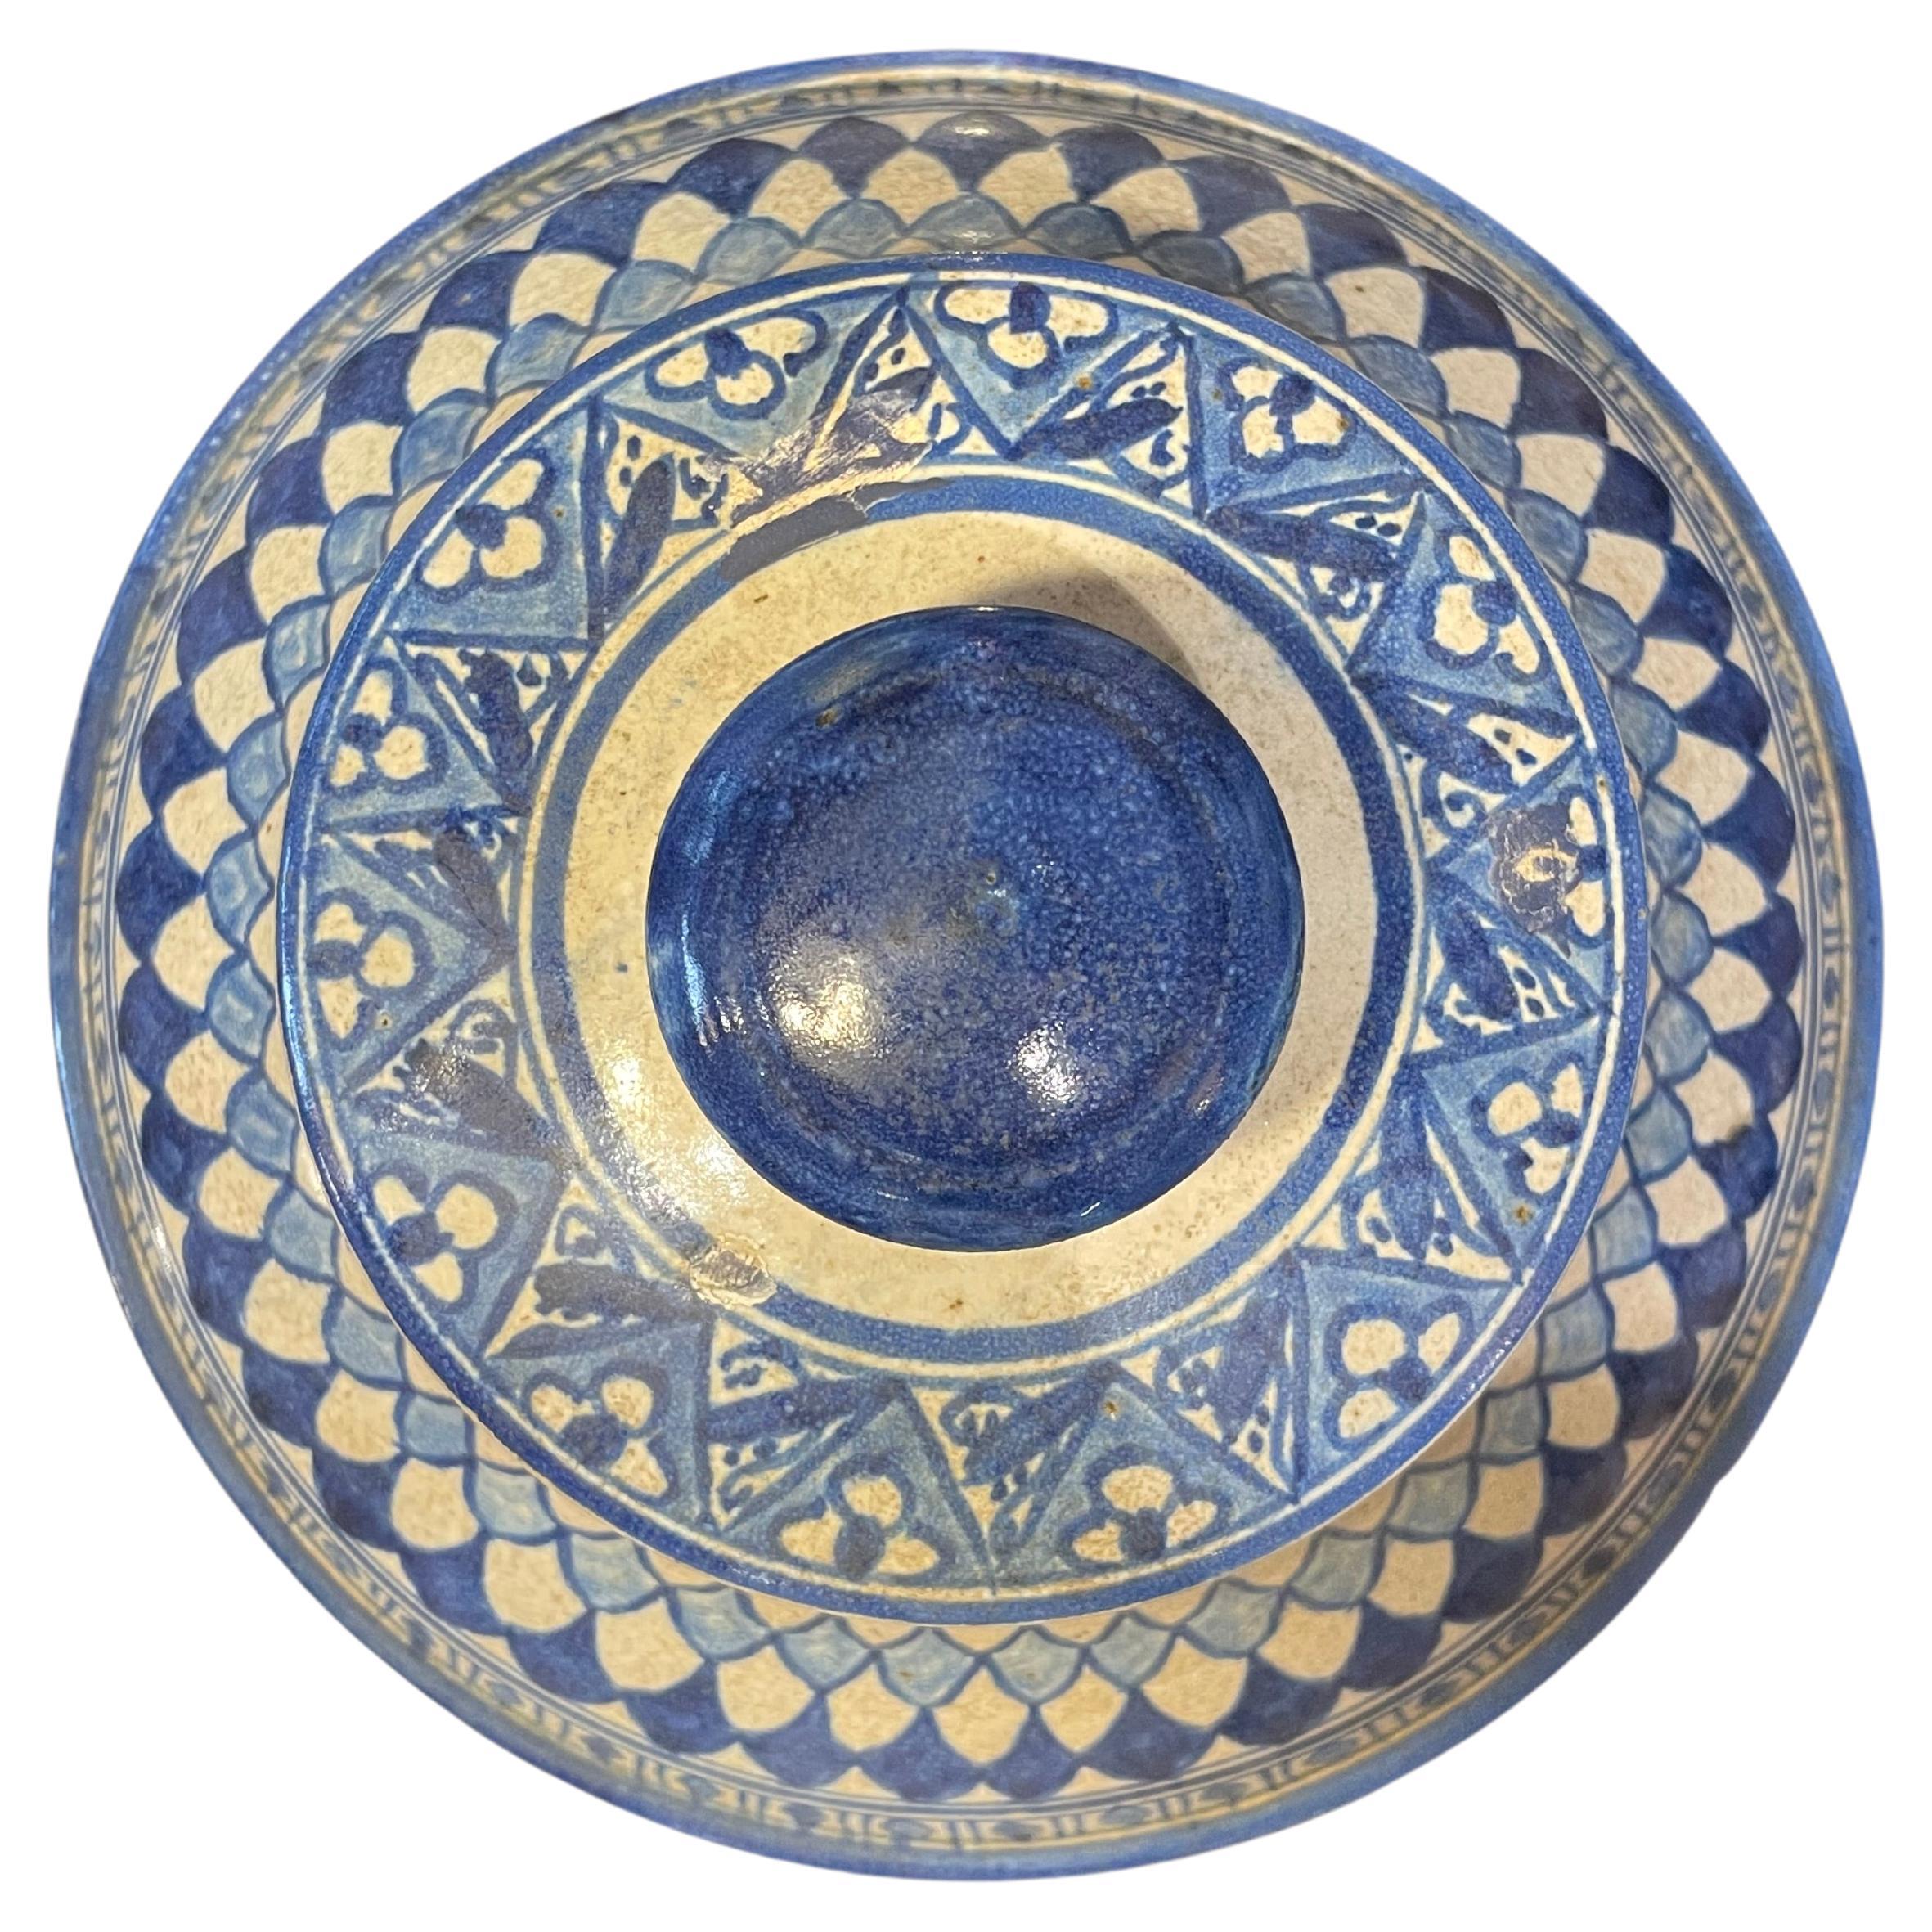 Vintage ceramic Moroccan covered dish. 
Hand-painted with three colors of blue paint on an ivory glazed finish. Circa 1940